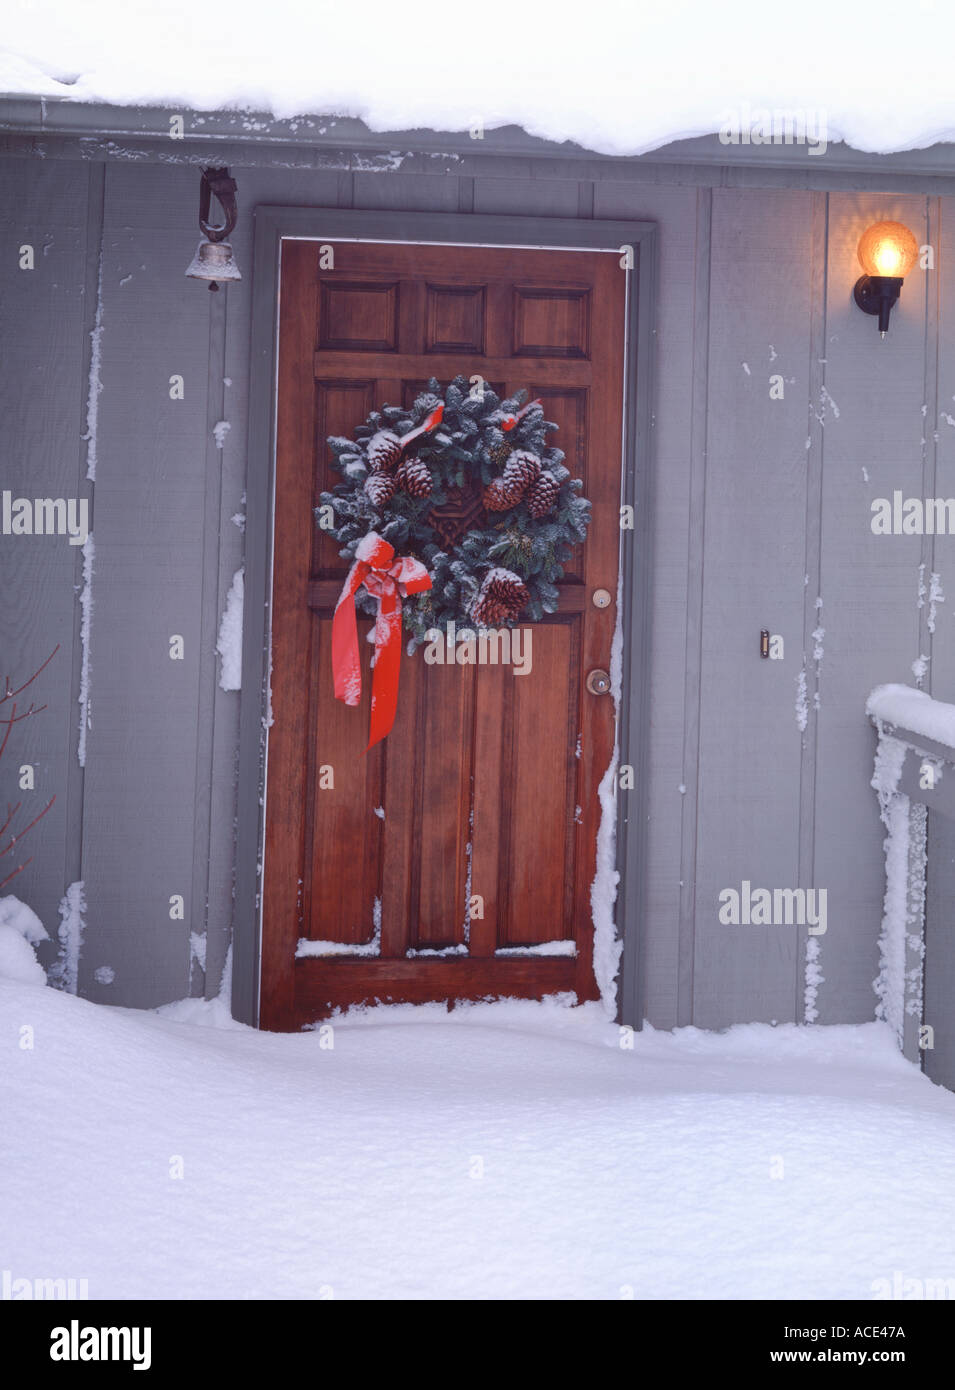 Christmas wreath on front door of suburban home with new snow covering the deck Stock Photo